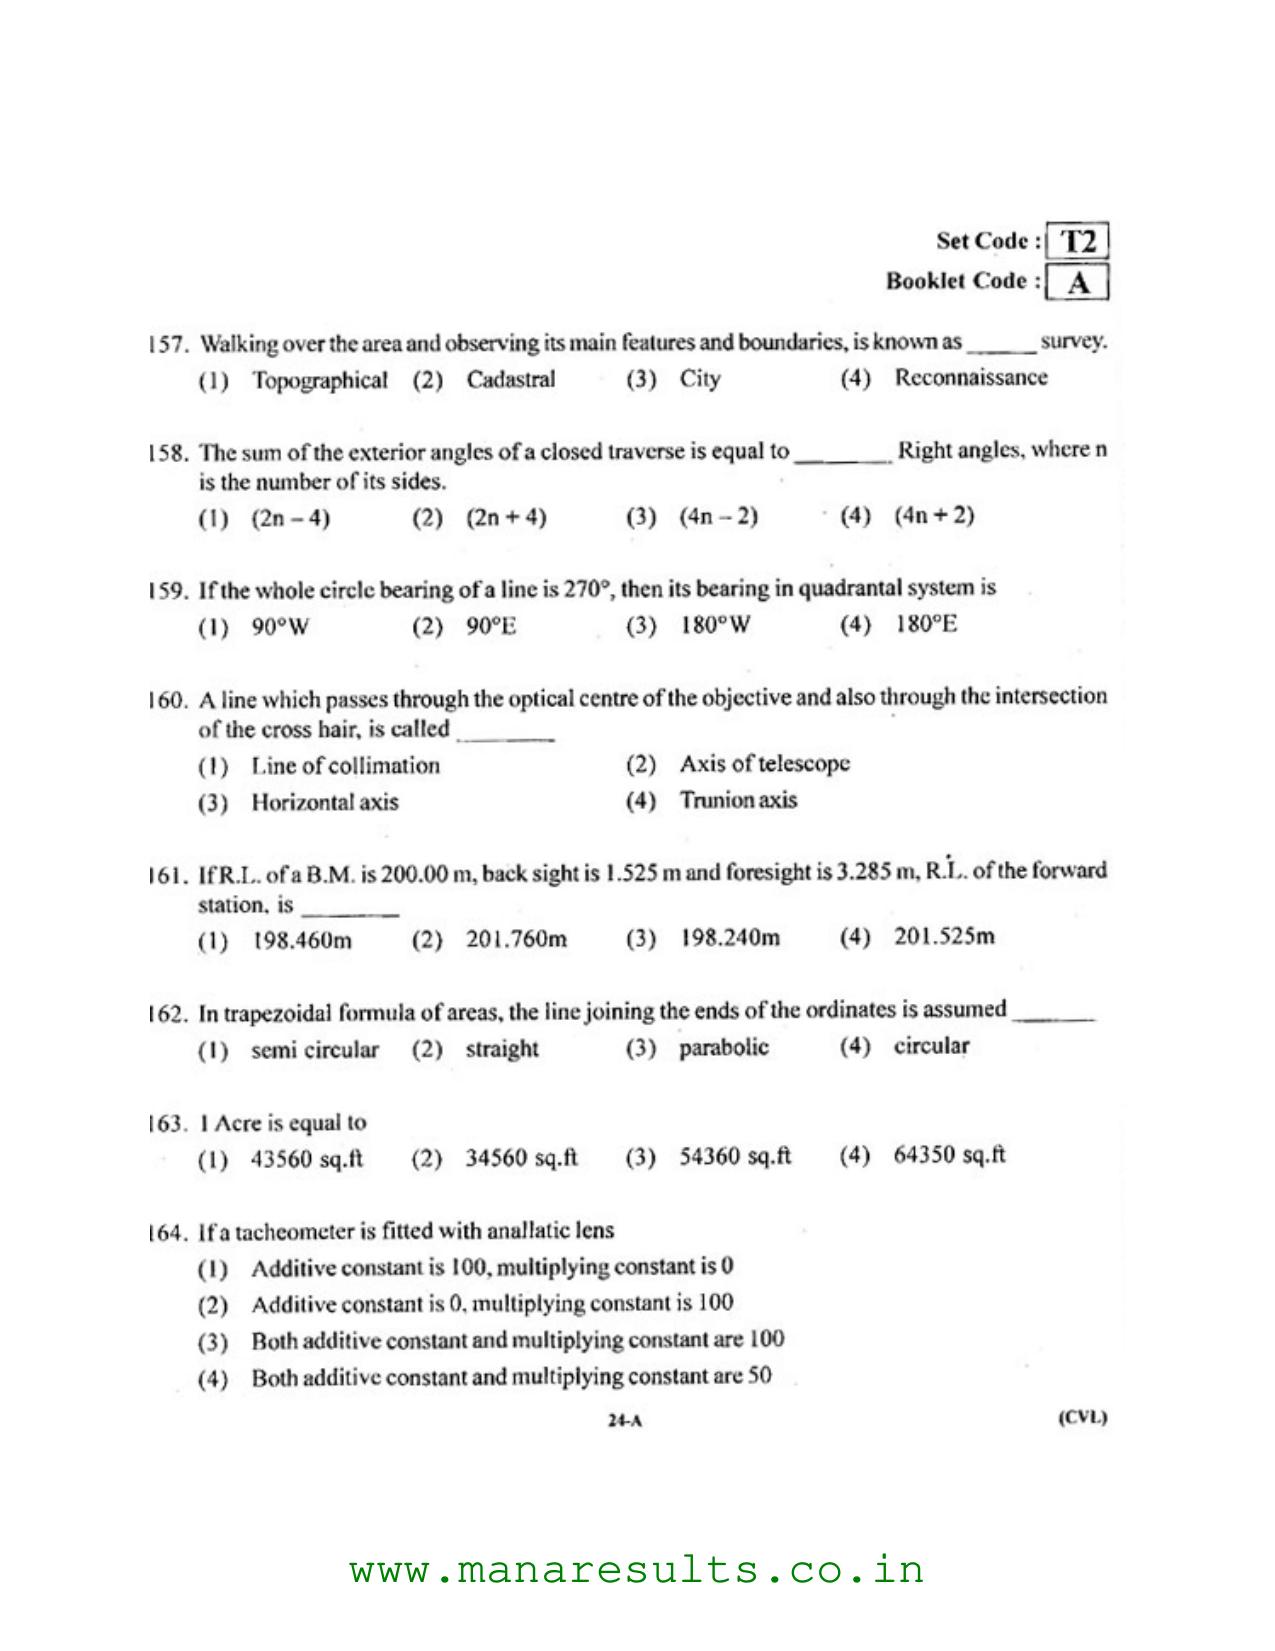 AP ECET 2016 Civil Engineering Old Previous Question Papers - Page 23